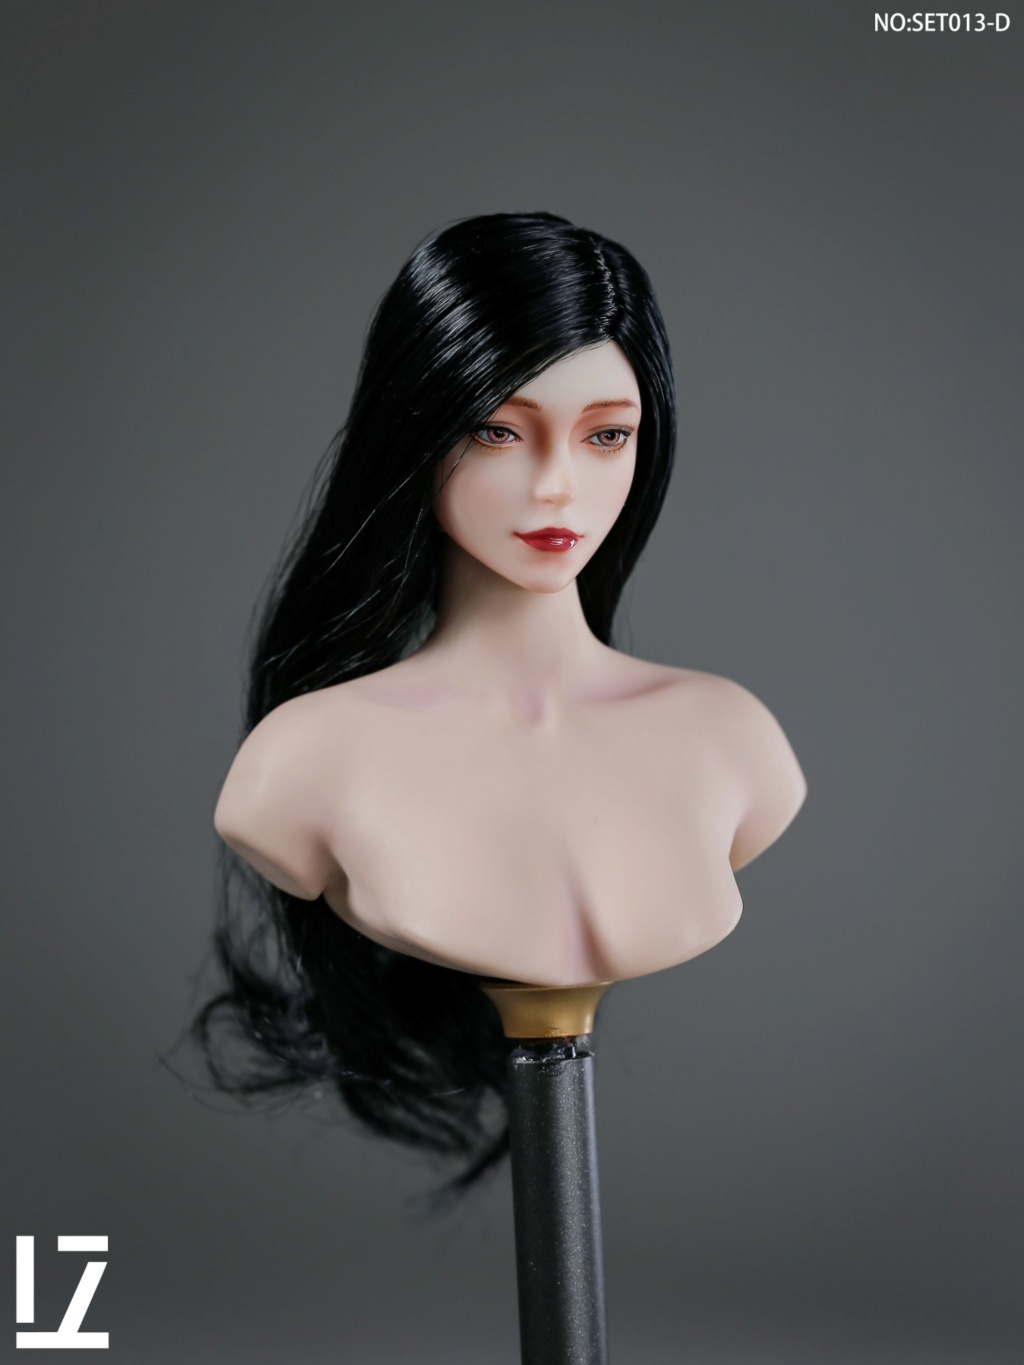 accessory - NEW PRODUCT: LZ TOYS: 1/6 hair transplant female head carving SET013 Mayfair A/B/C/D four hair colors 09404310